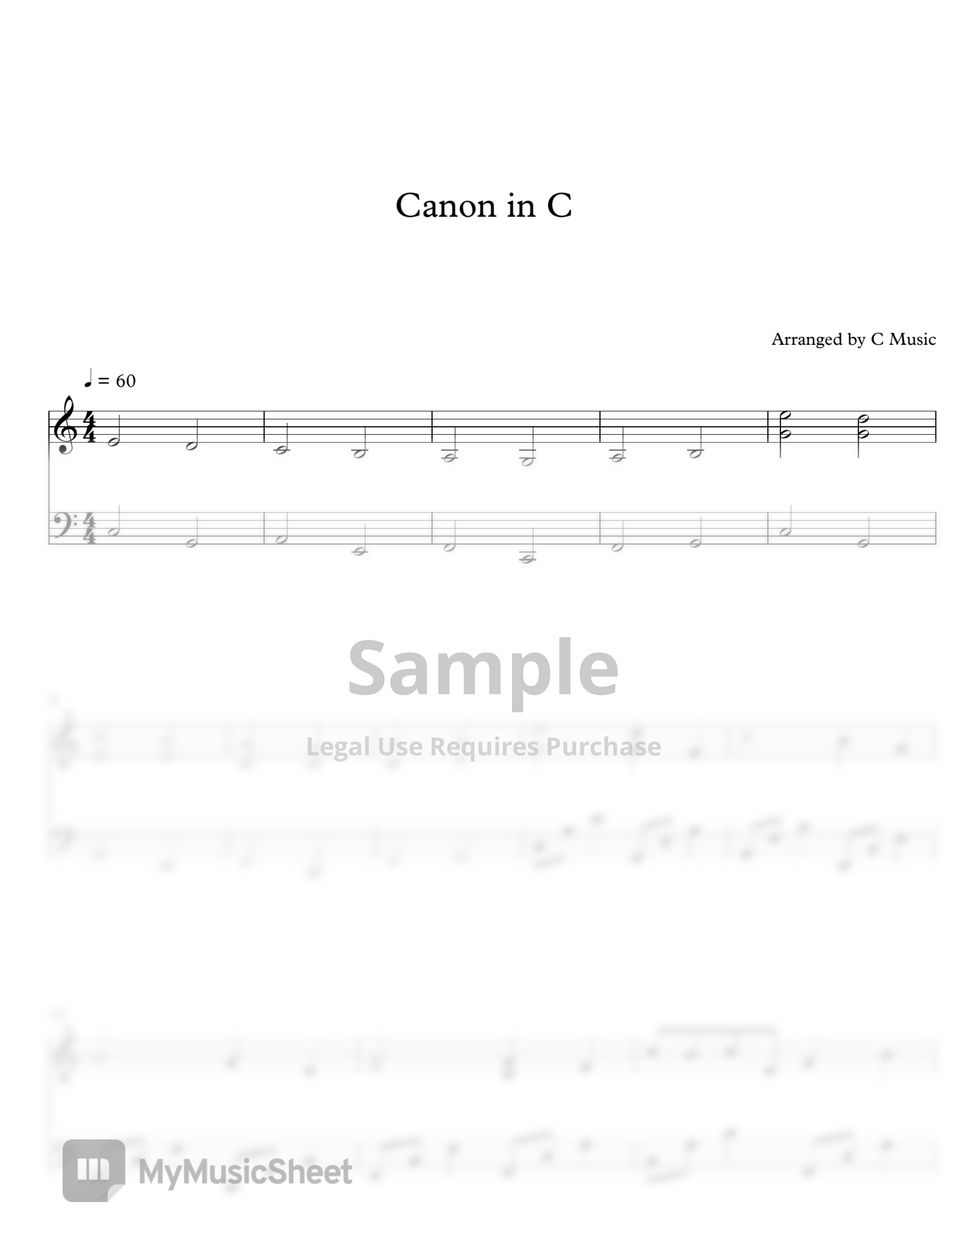 Pachelbel - Canon In C by C Music